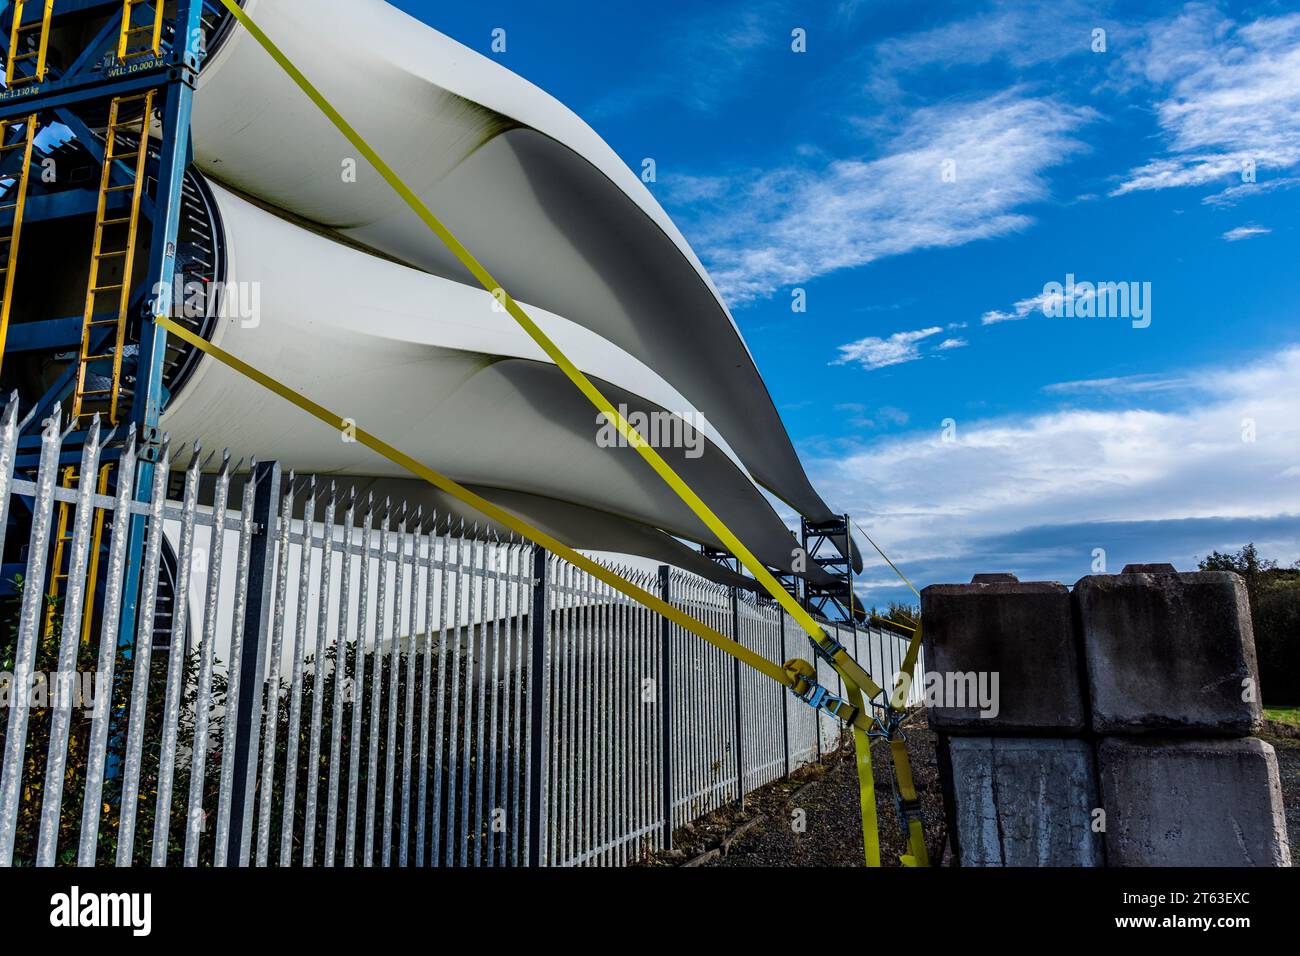 Off shore wind farm turbine blades stacked at Killybegs harbour, County Donegal, Ireland Stock Photo